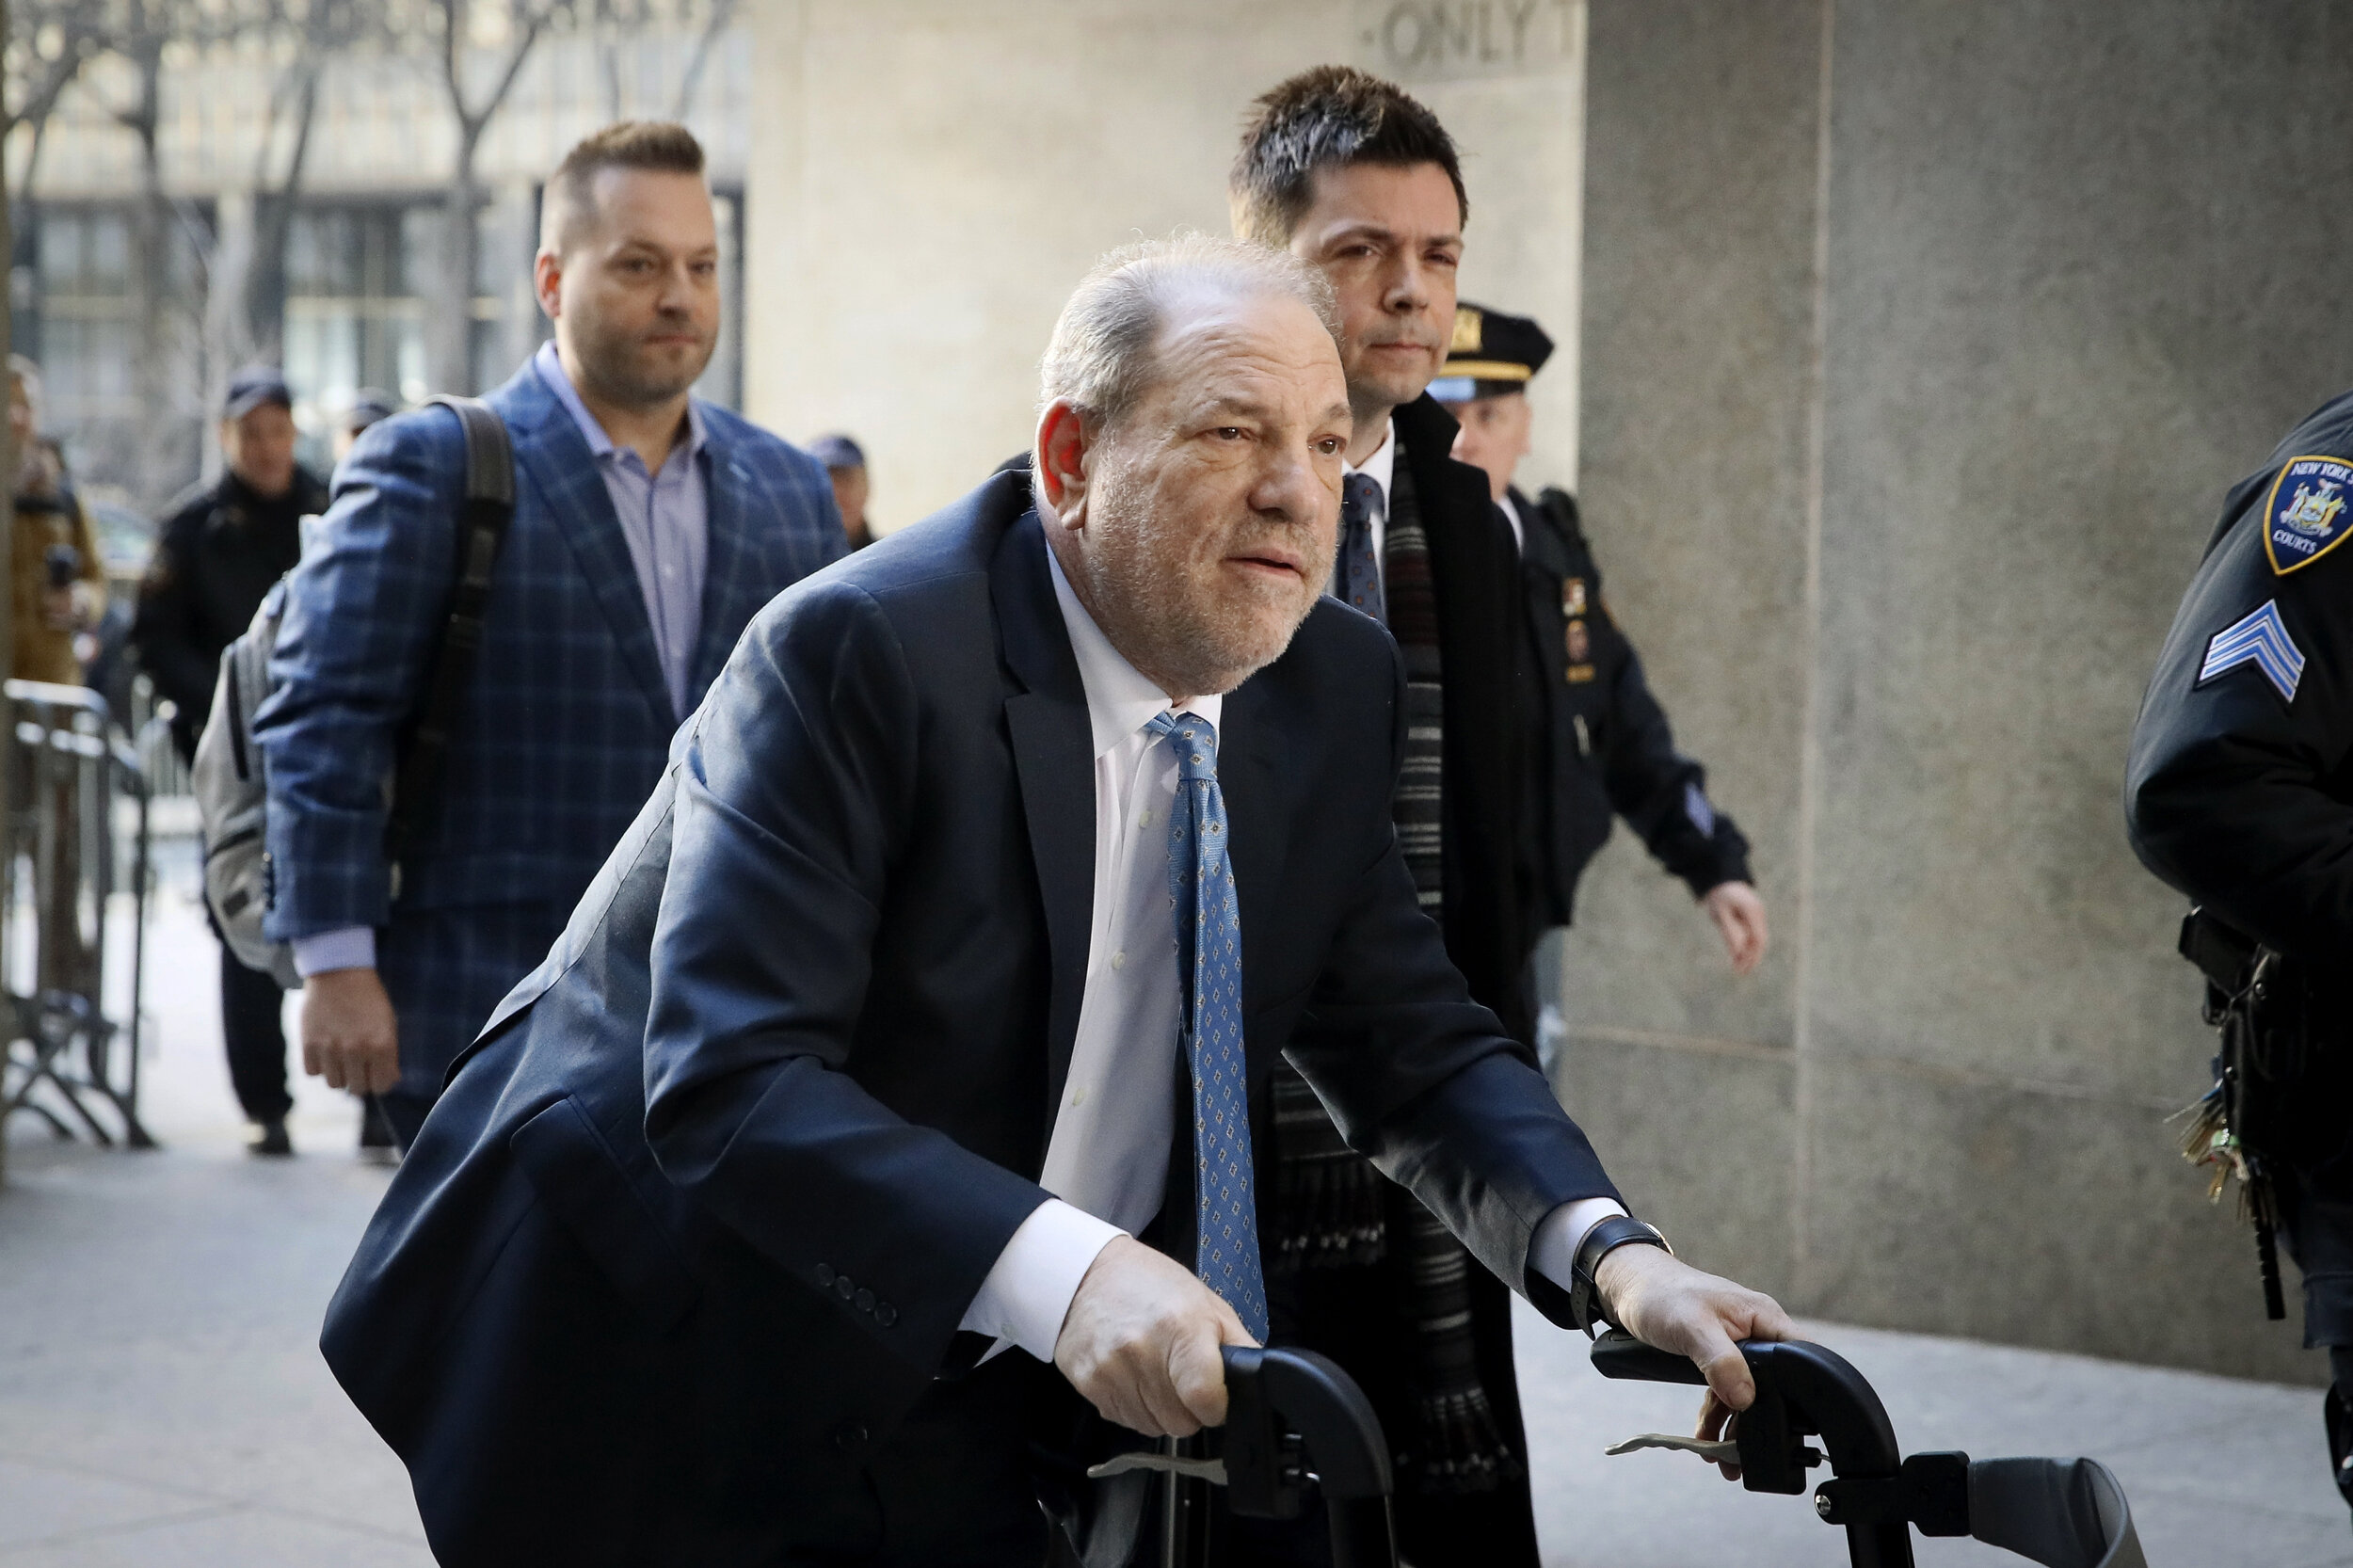 In this Feb. 24, 2020 file photo, Harvey Weinstein arrives at a Manhattan courthouse as jury deliberations continue in his rape trial in New York. Weinstein was transferred to a state prison in New York on March 18, to begin a 23-year sentence for r…